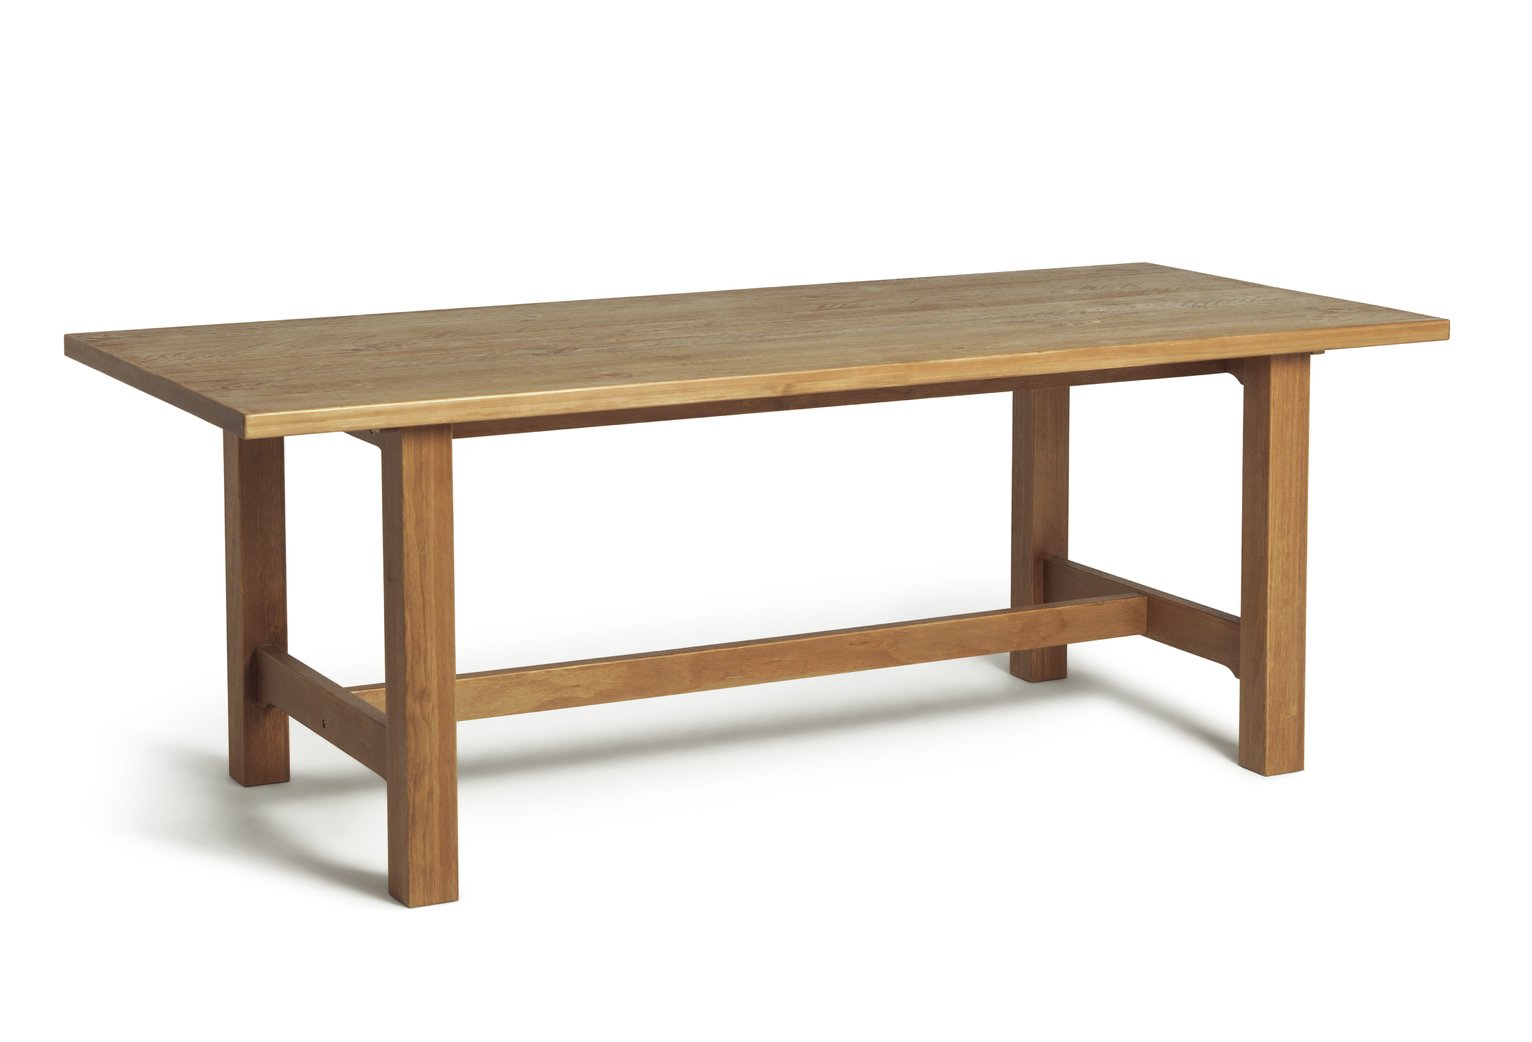 Habitat Denver Solid Wood 8 Seater Refectory Table - Pine